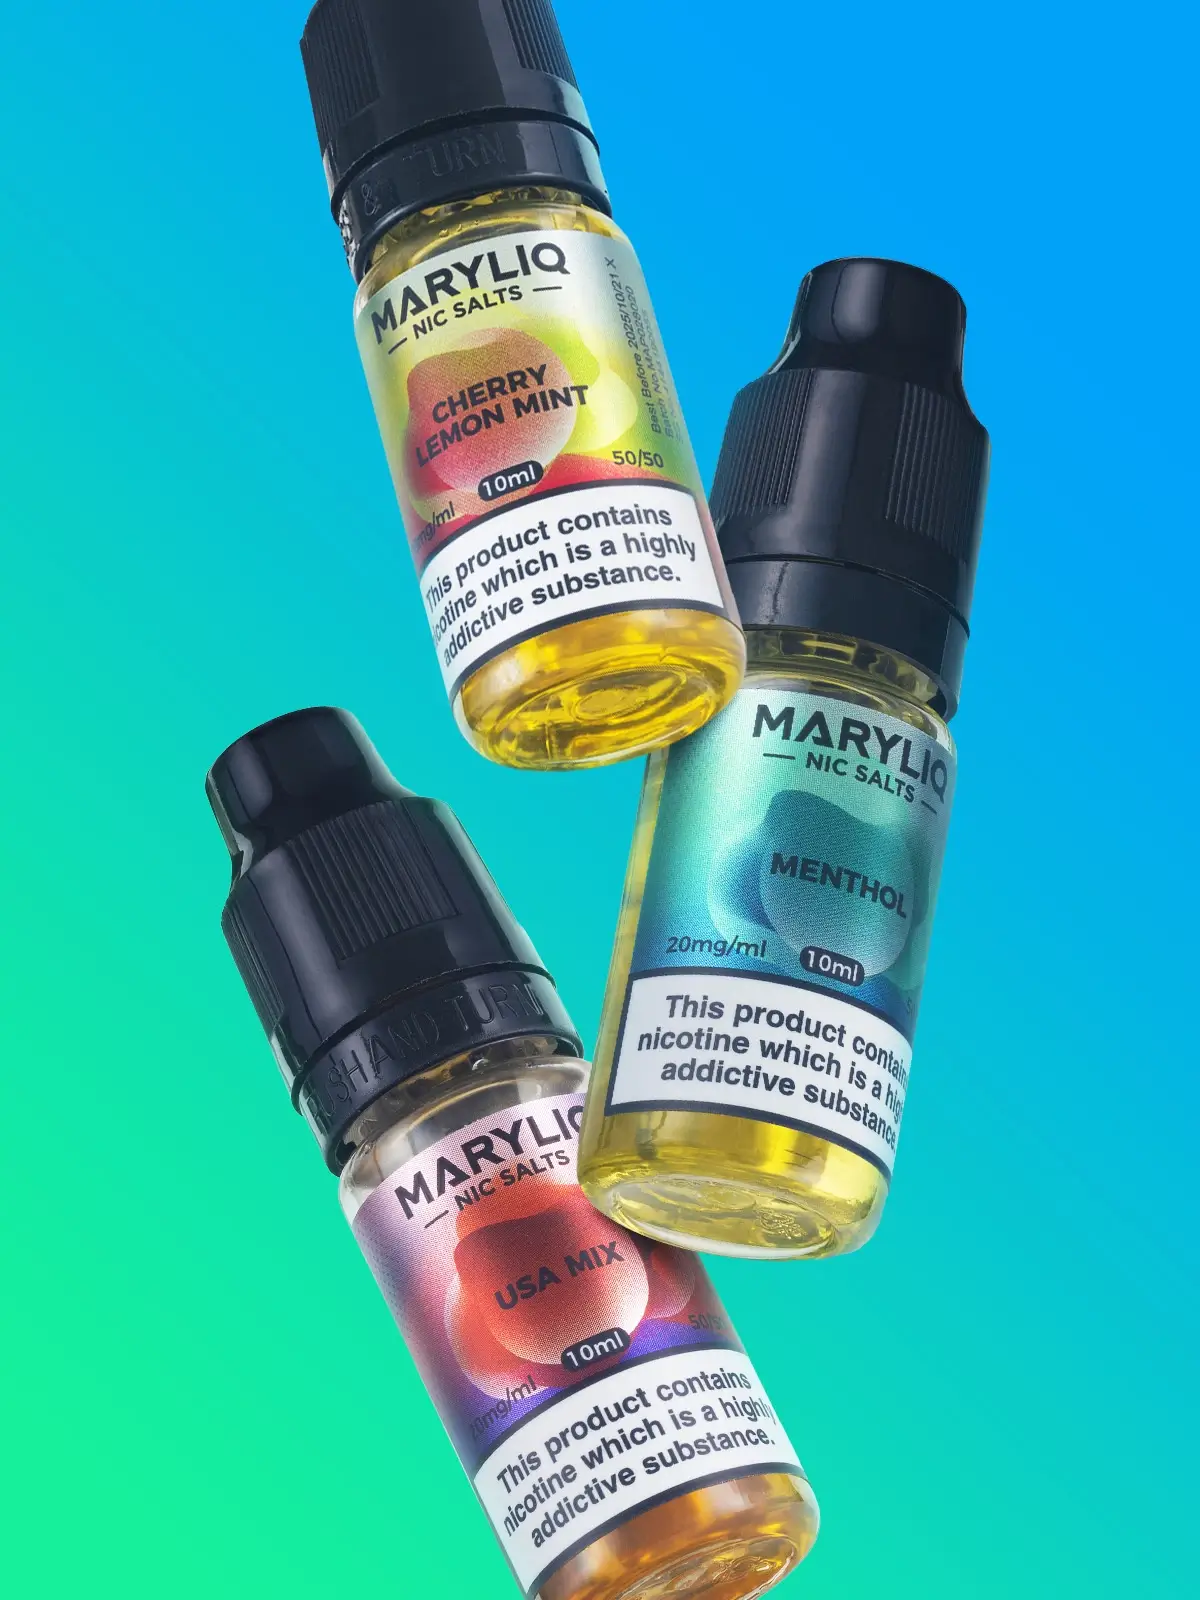 Three bottles of Maryliq e-liquid; Cherry Lemon Mint, Menthol and USA Mix - floating in front of a blue and green background